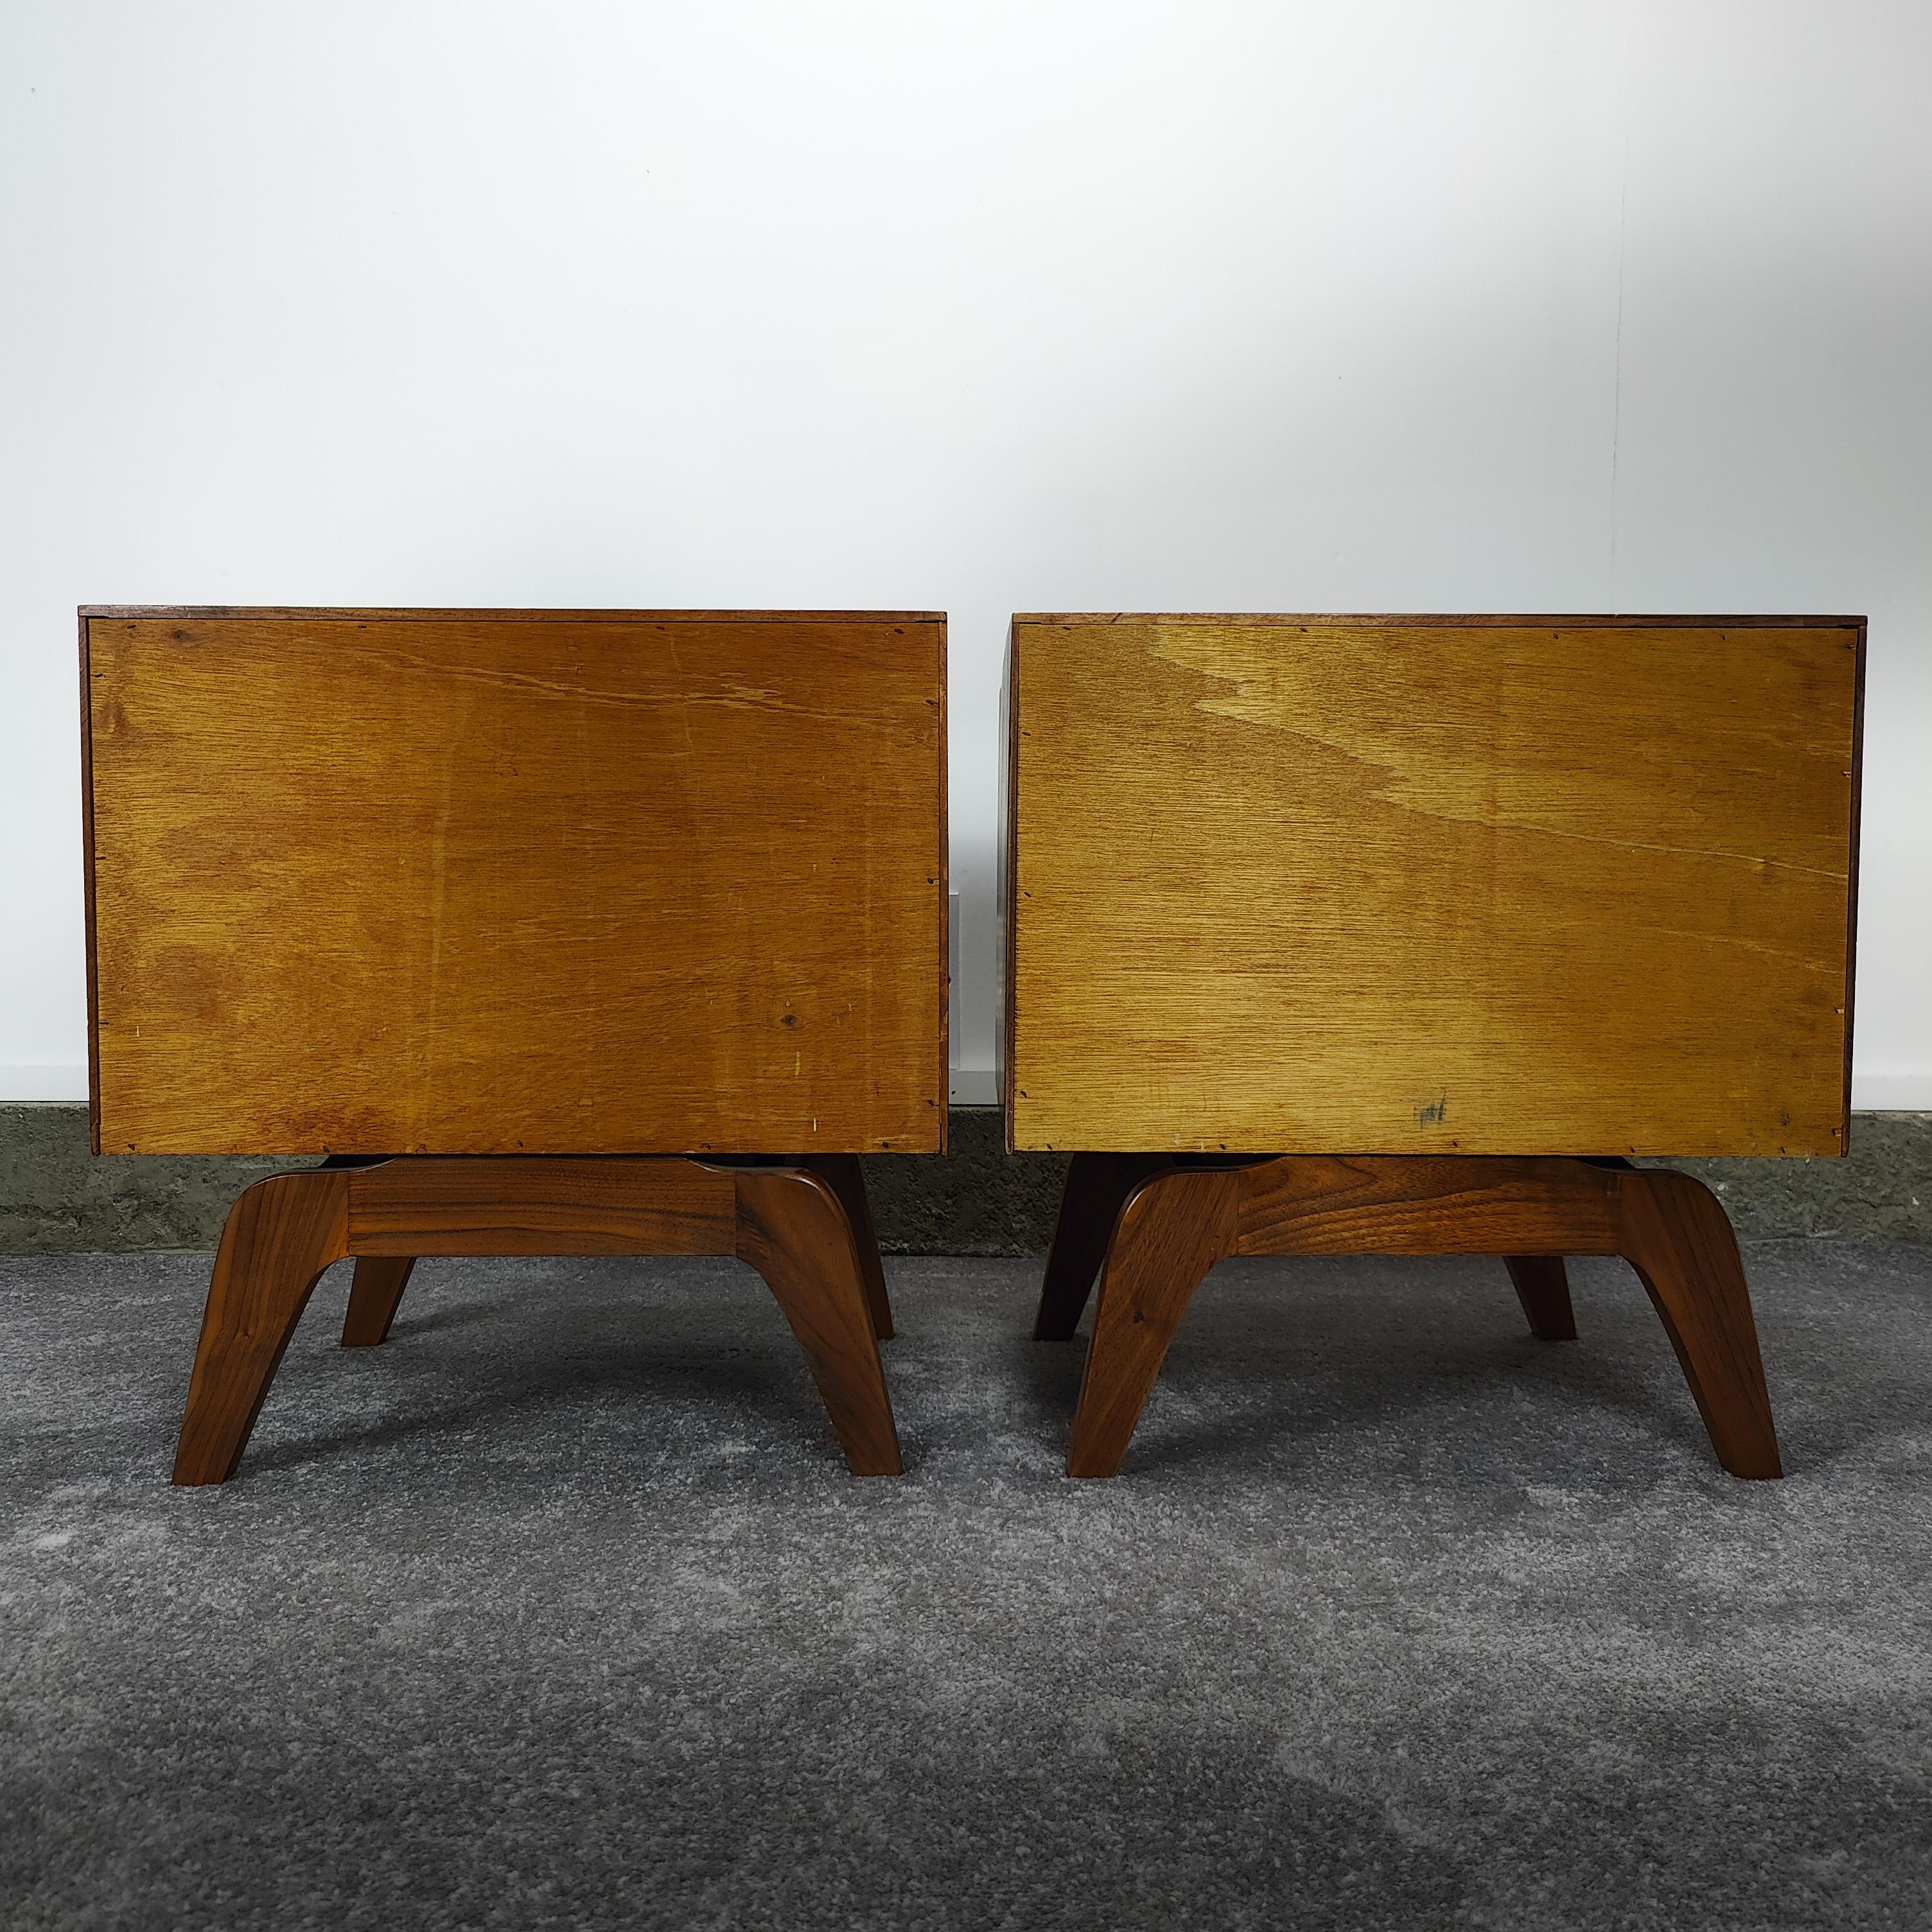 Pair Vintage Mid Century Modern Walnut Sculptural Nightstands, c1960s In Good Condition For Sale In Chino Hills, CA